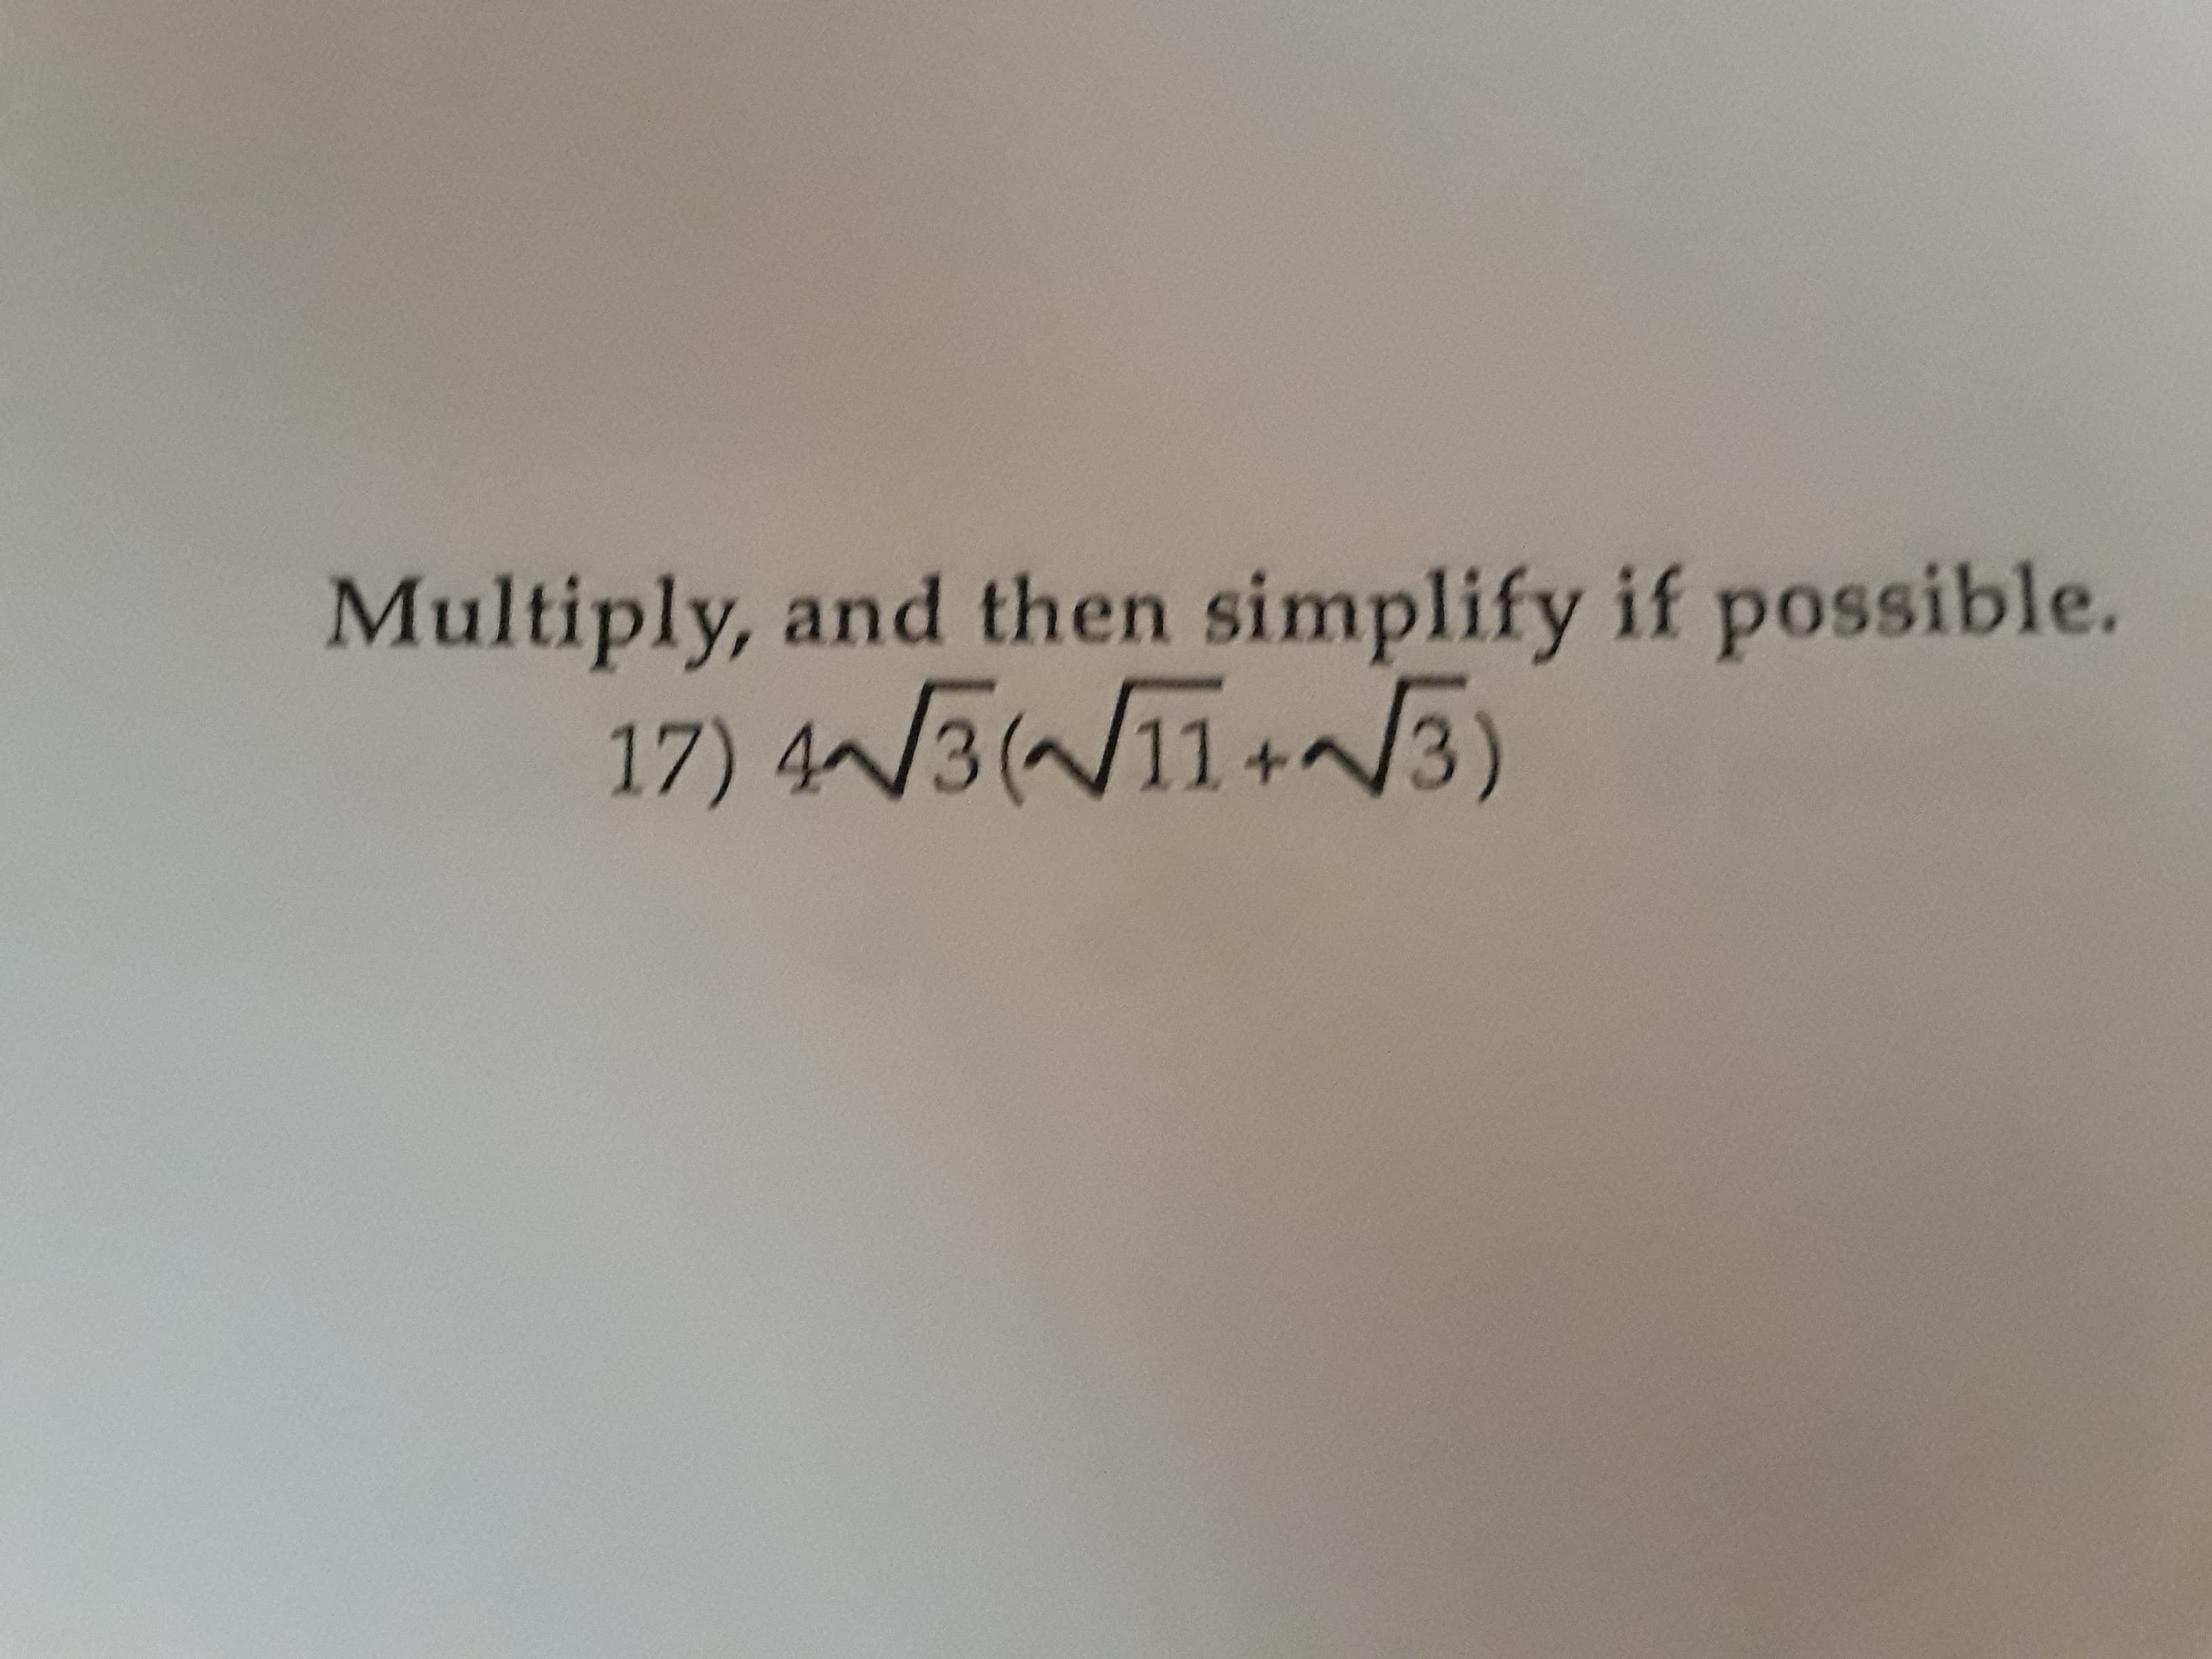 Multiply, and then simplify if possible.
17) 4 3(11+3)
